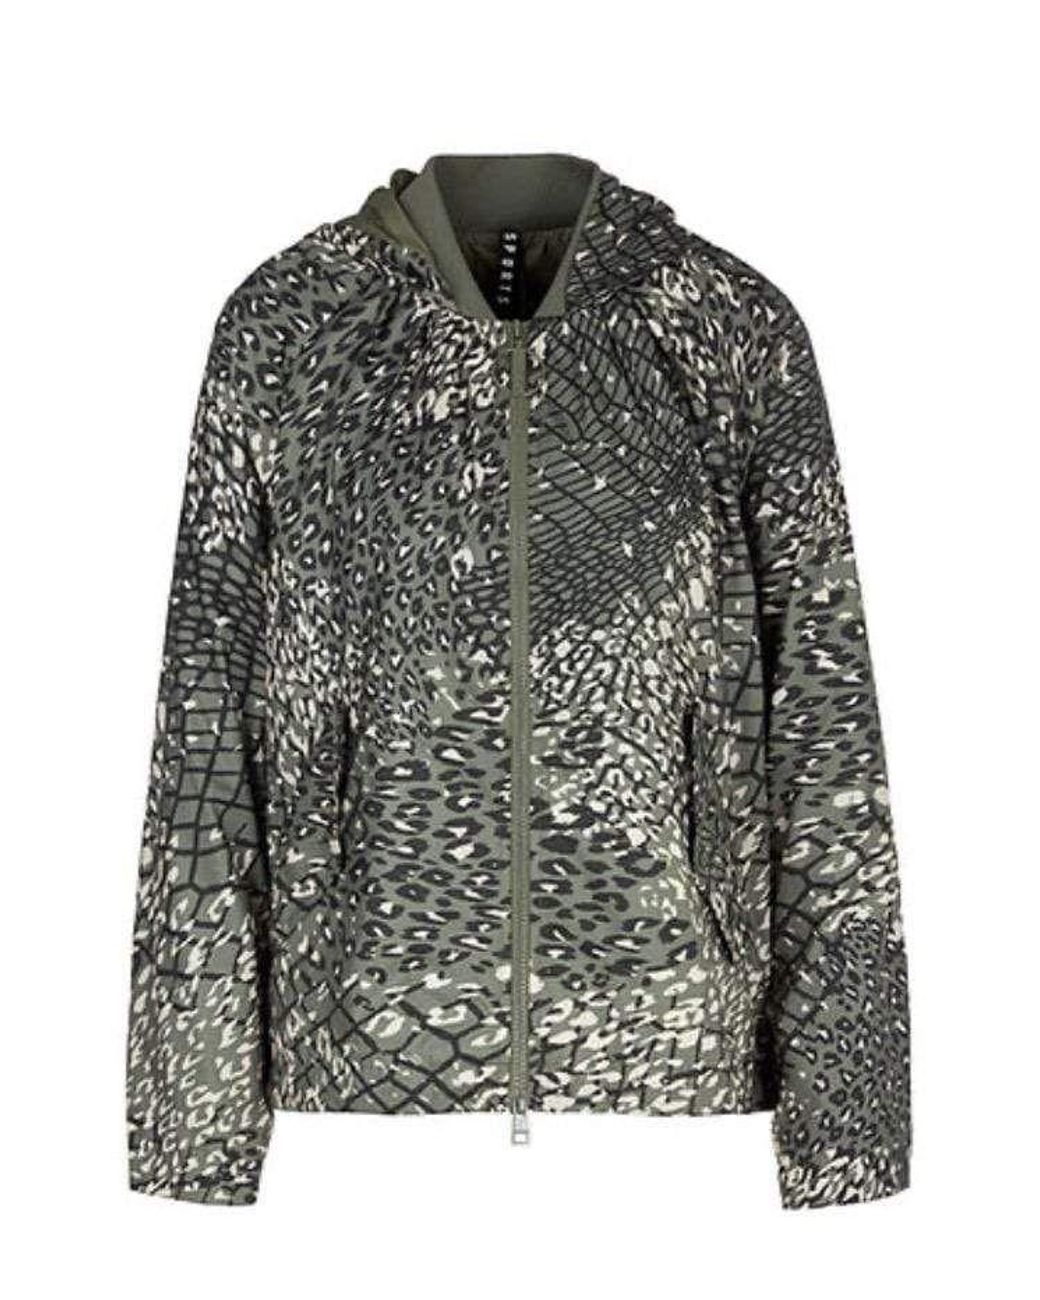 Marc Cain Synthetic Sports Leopard Printed Jacket Qs 12.05 W19 592 - Lyst